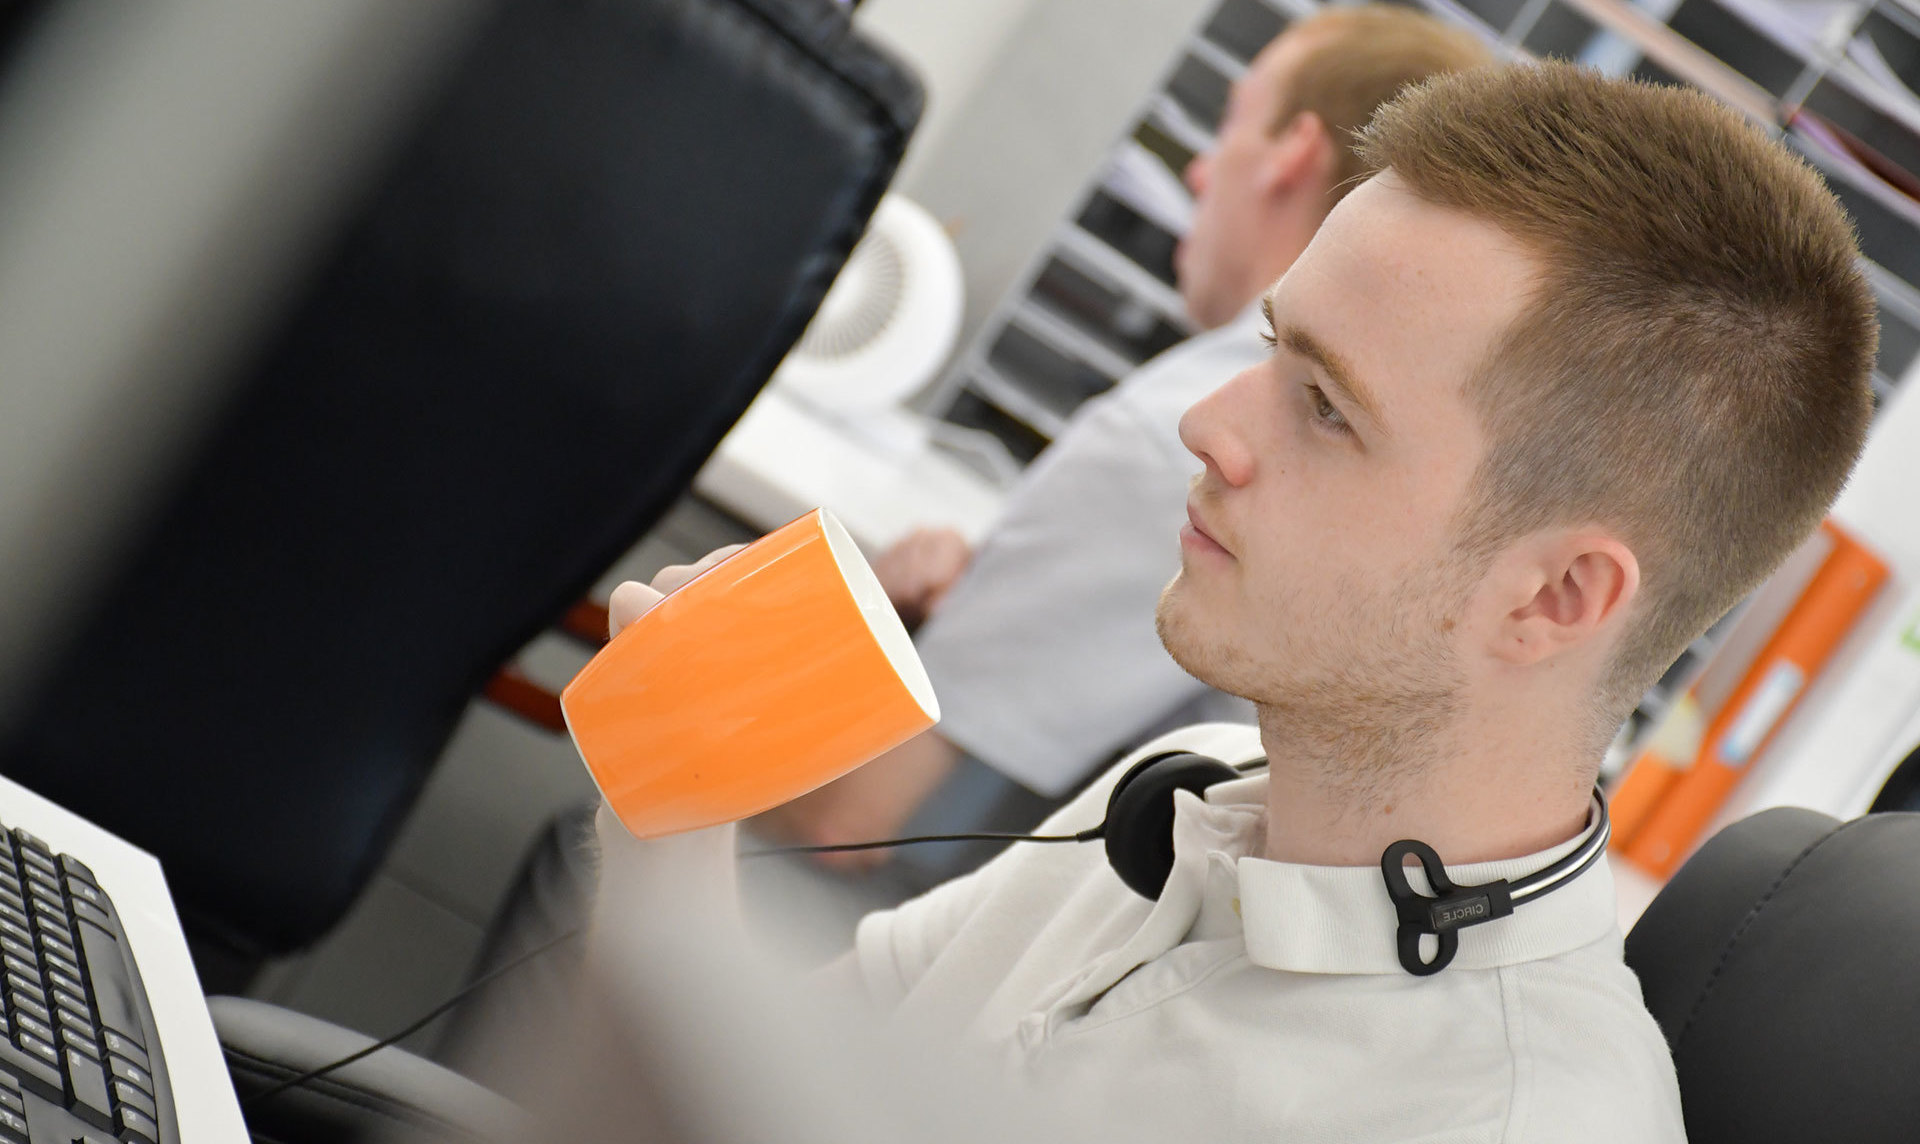 A website support worker looking at a laptop while drinking from a cup